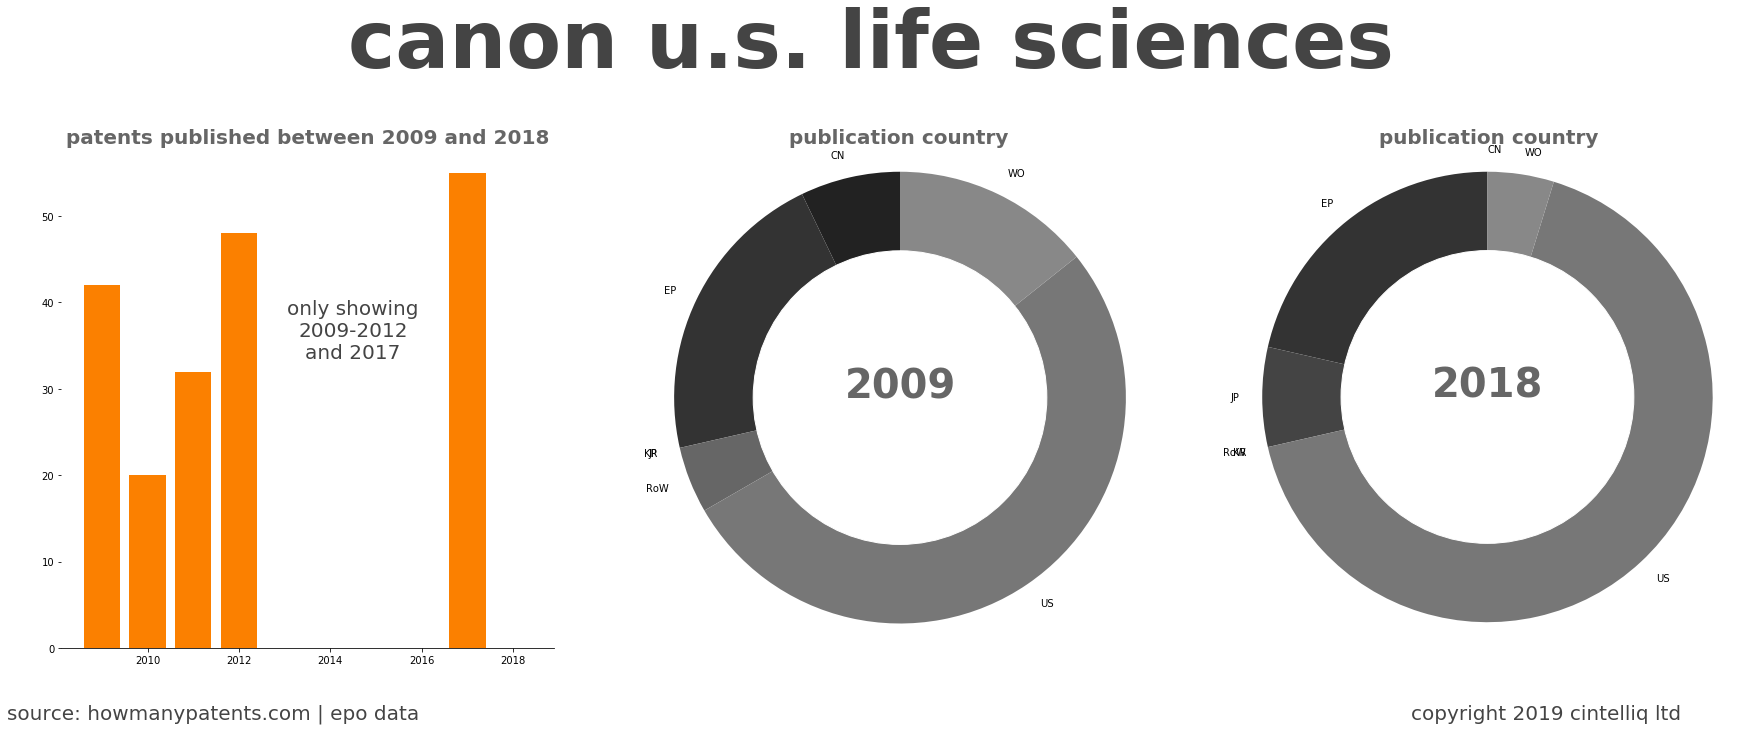 summary of patents for Canon U.S. Life Sciences